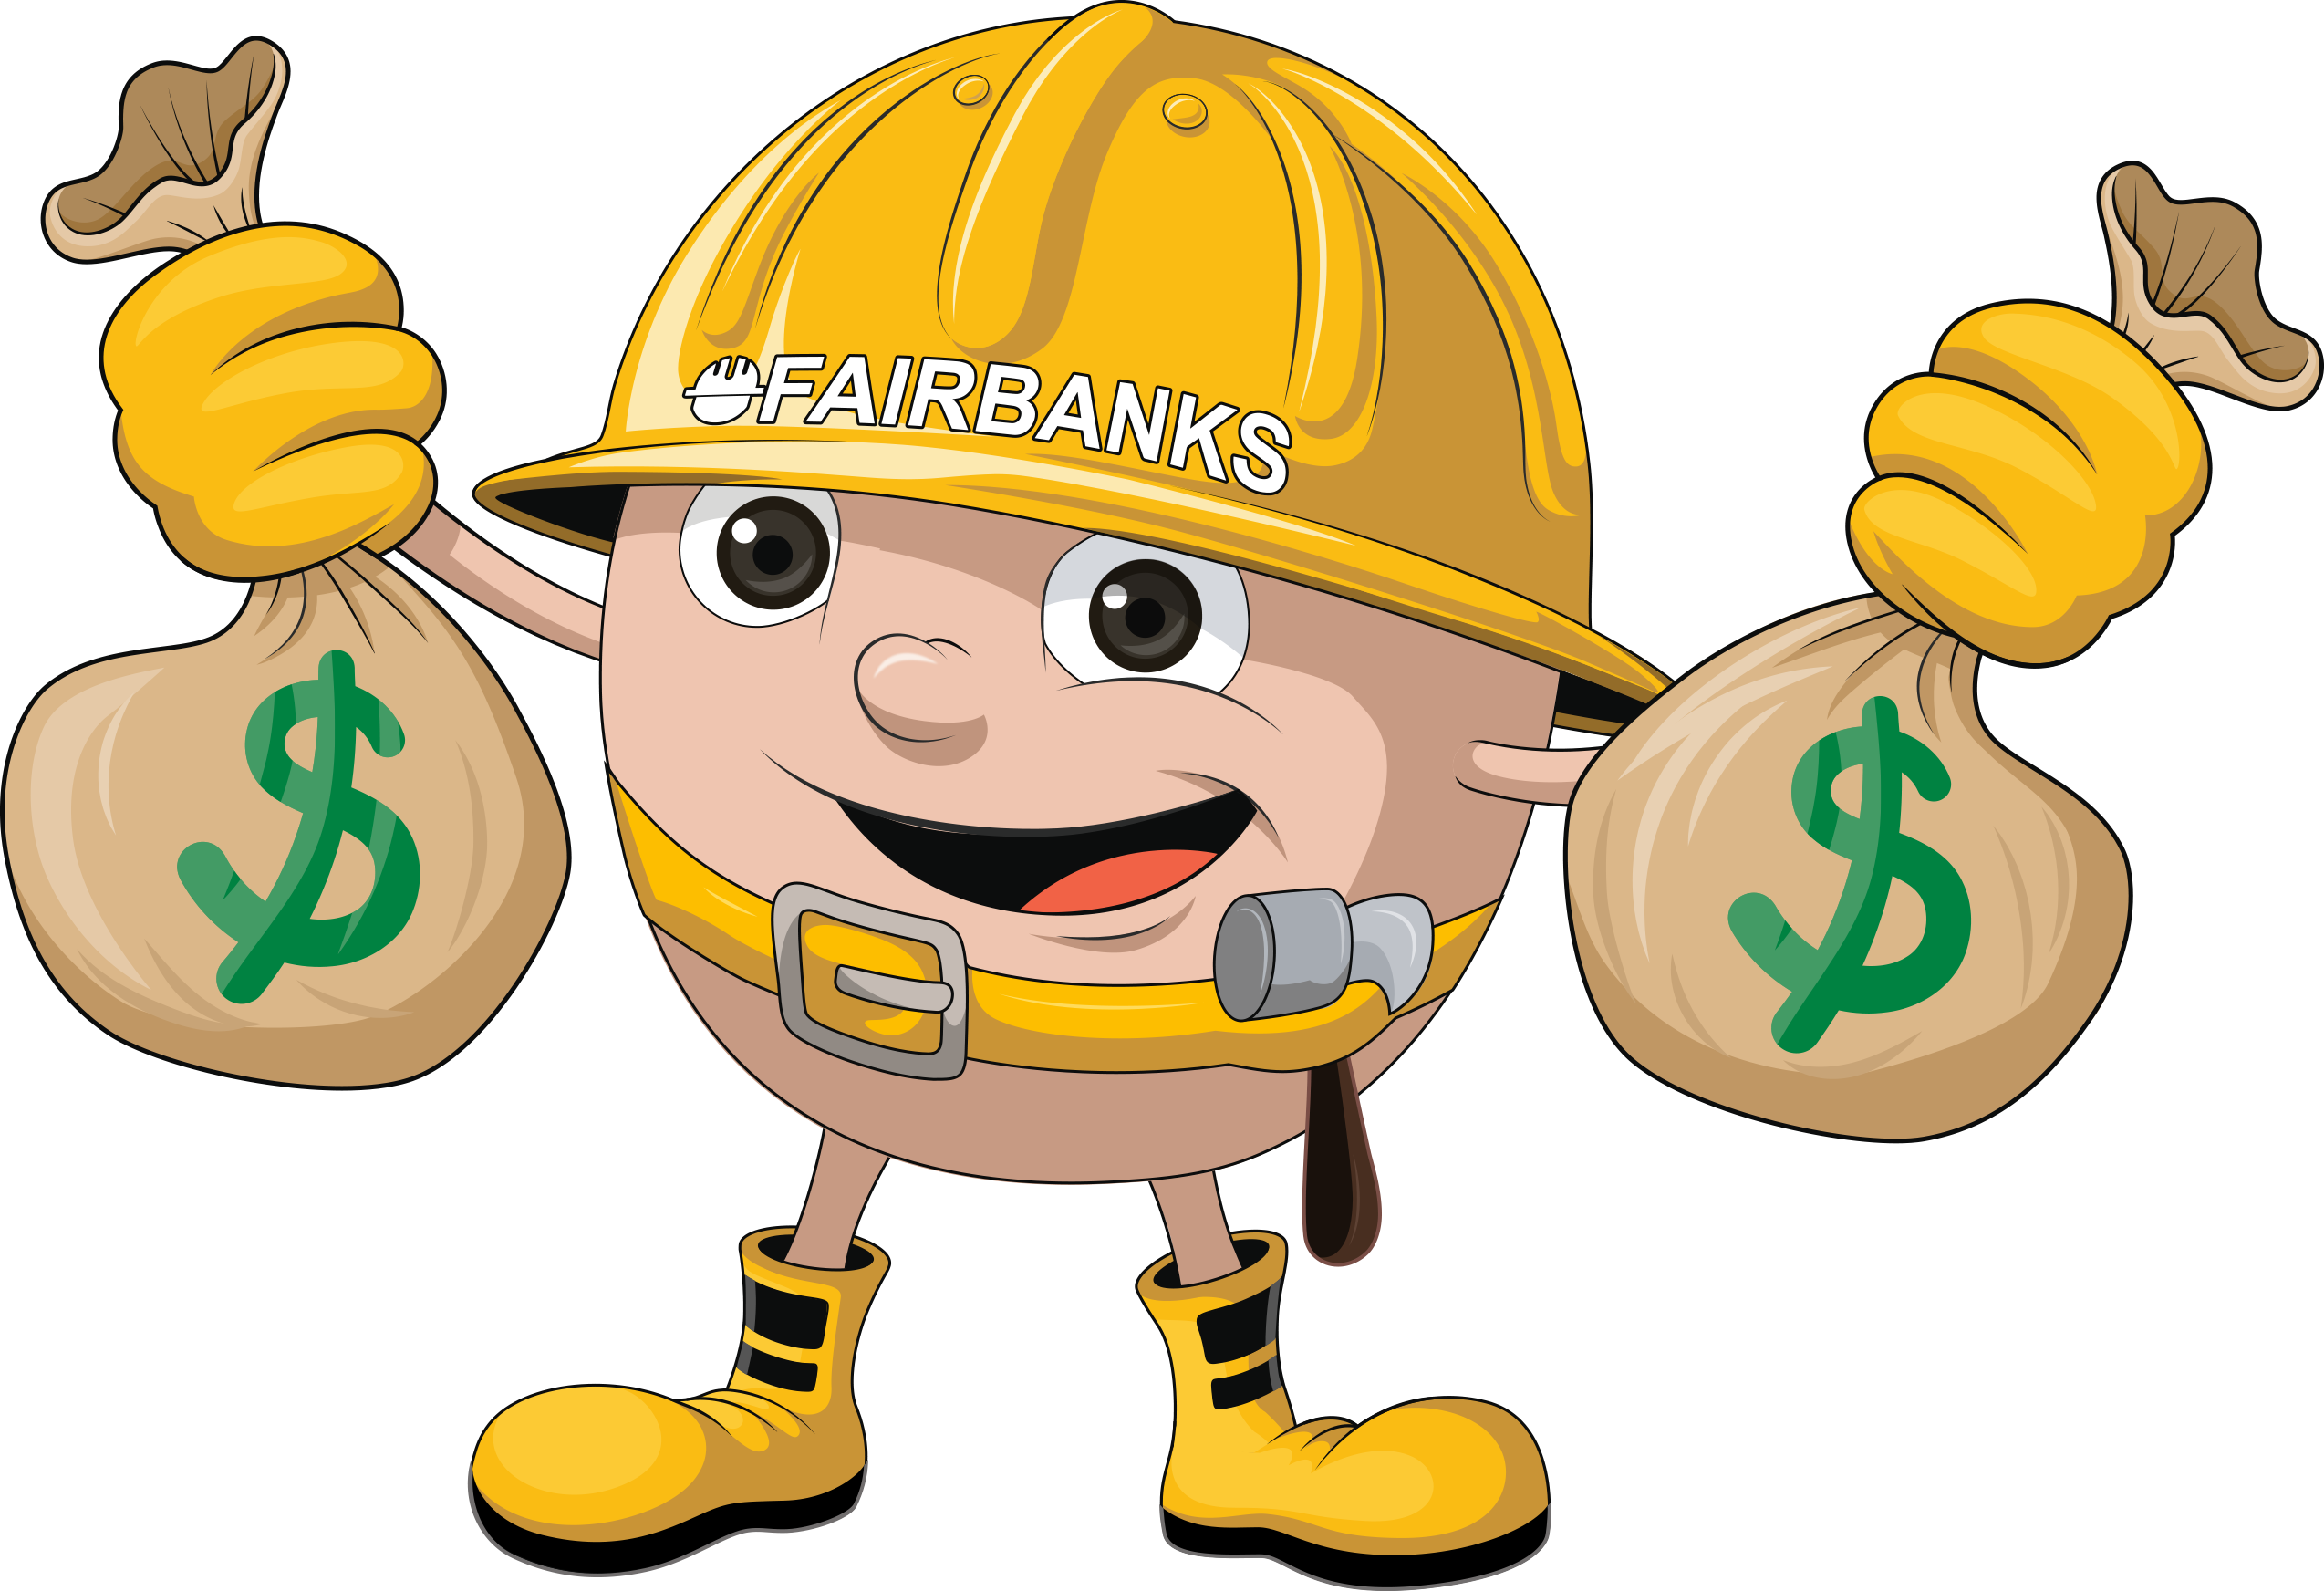 Contractor Excess Liability Insurance Mascot